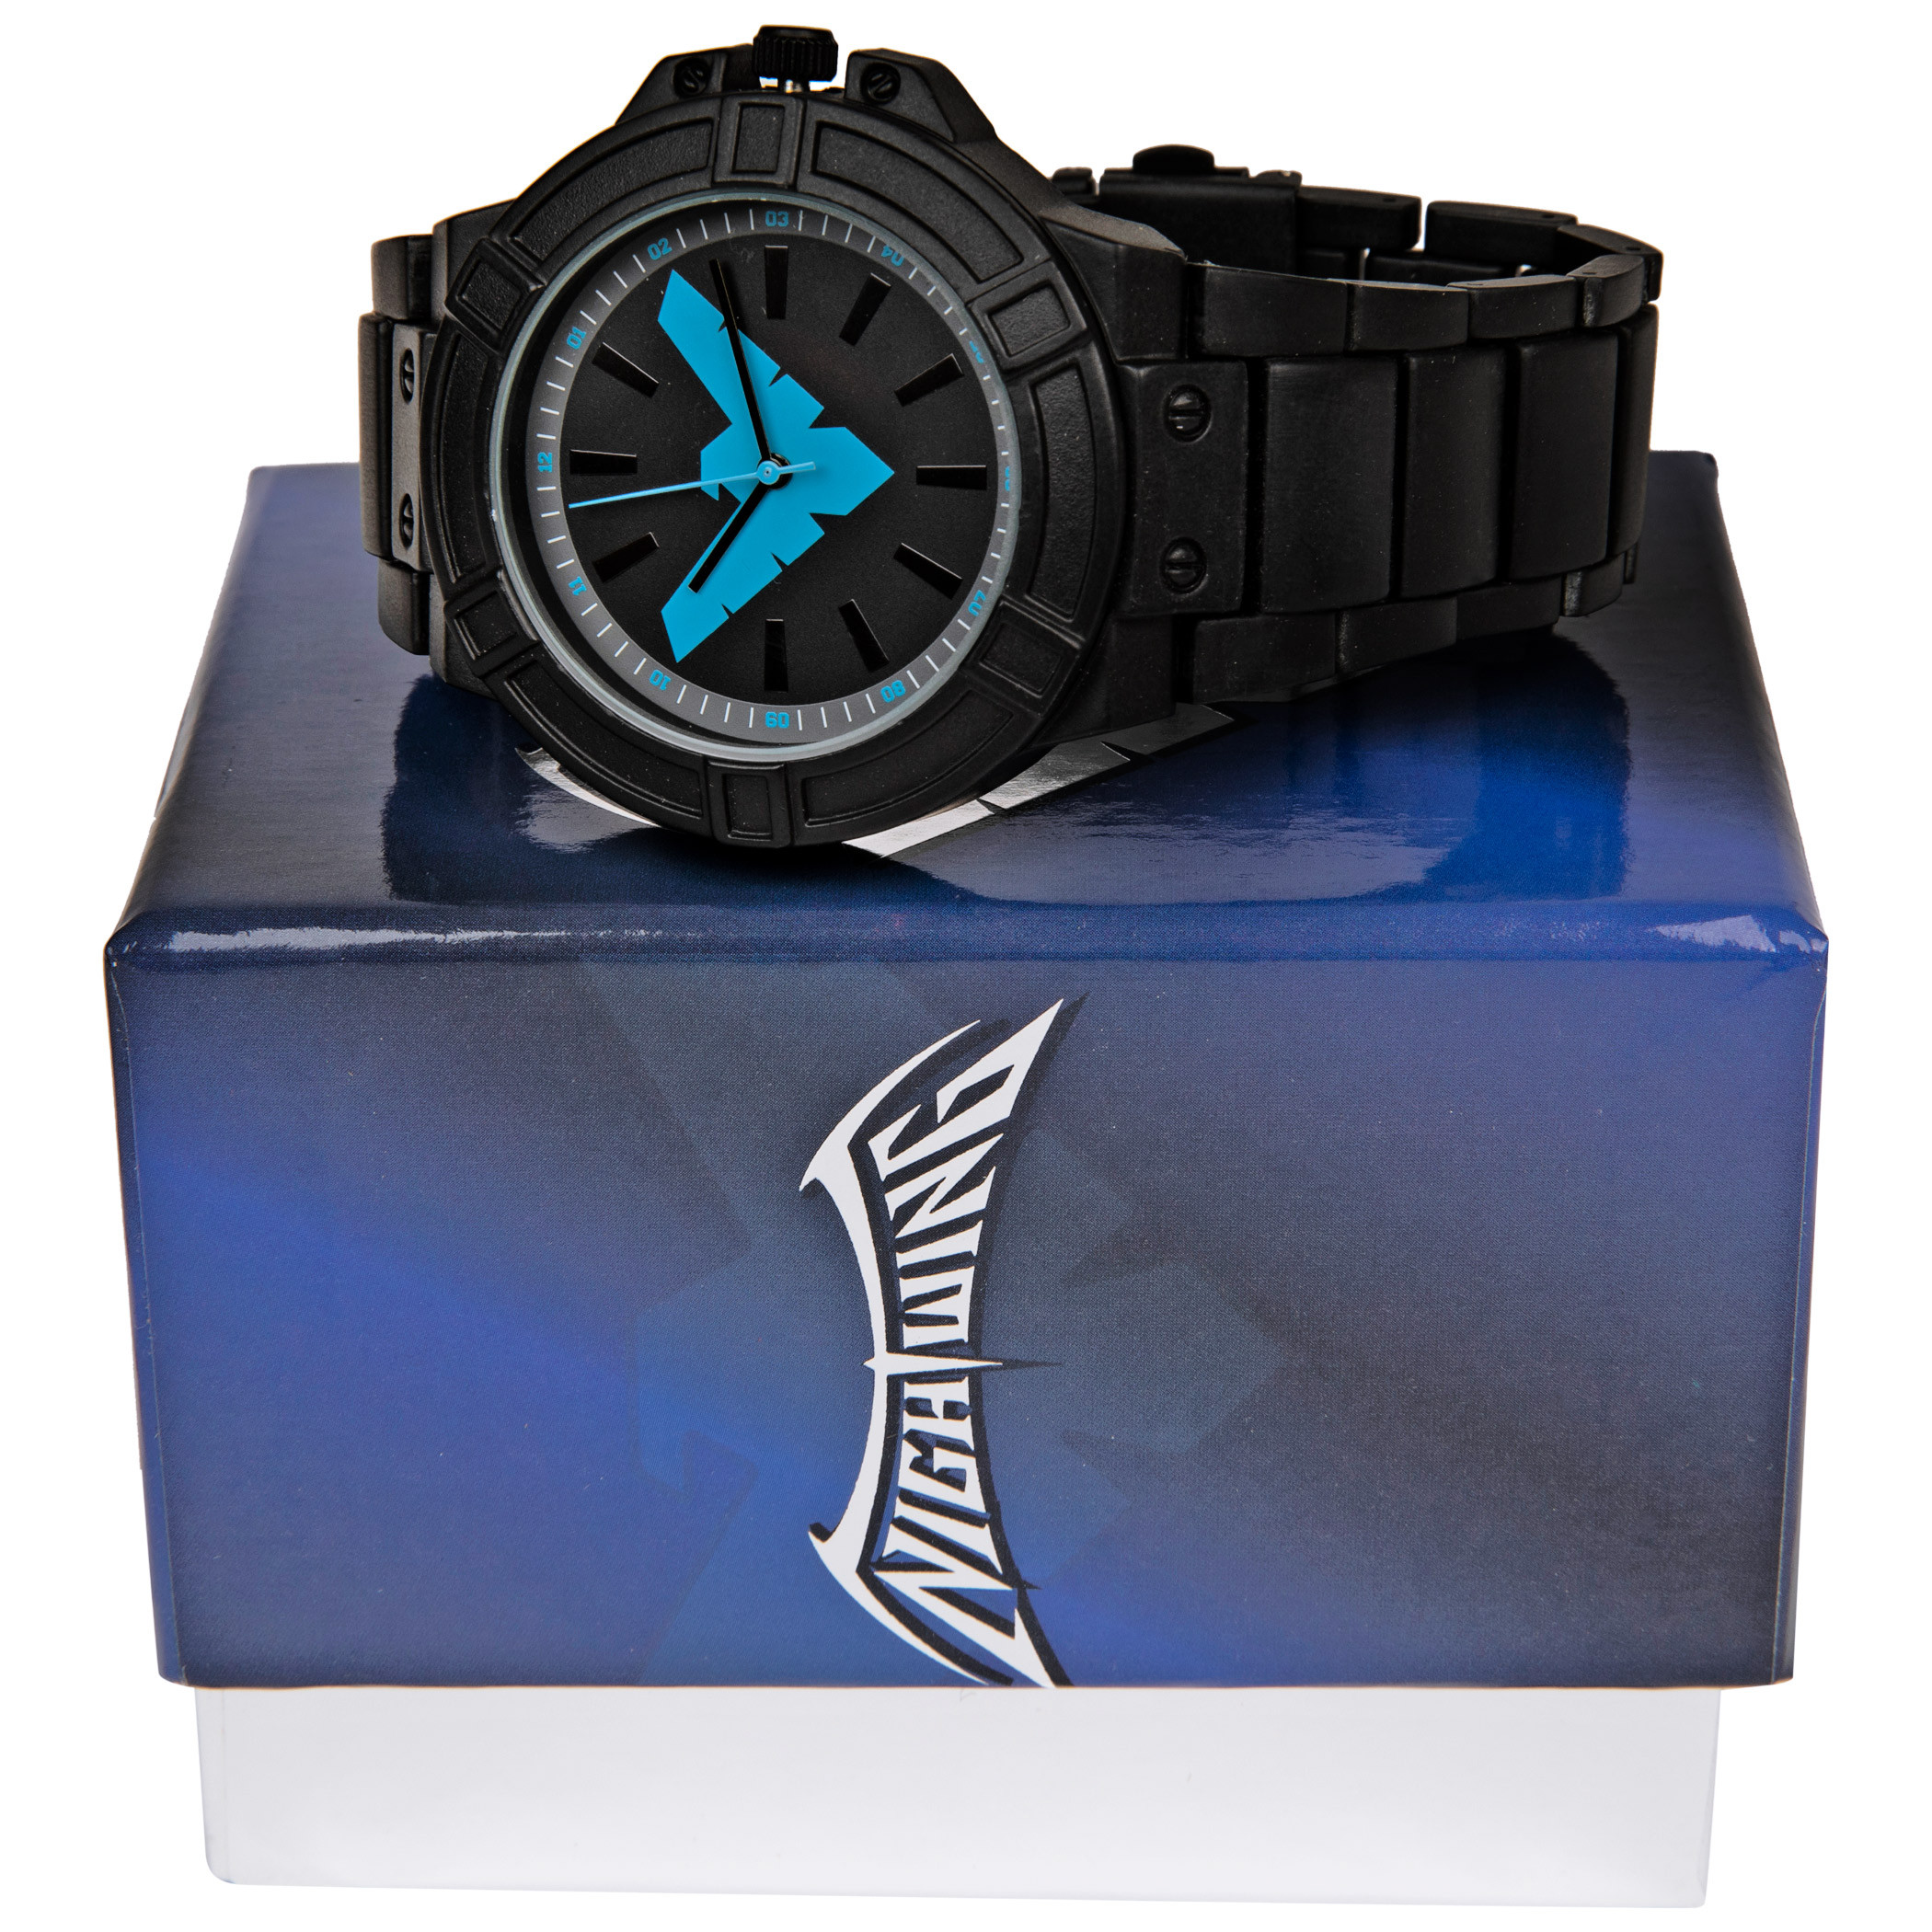 DC Comics Nightwing Classic Symbol Watch Face with Black Metal Band